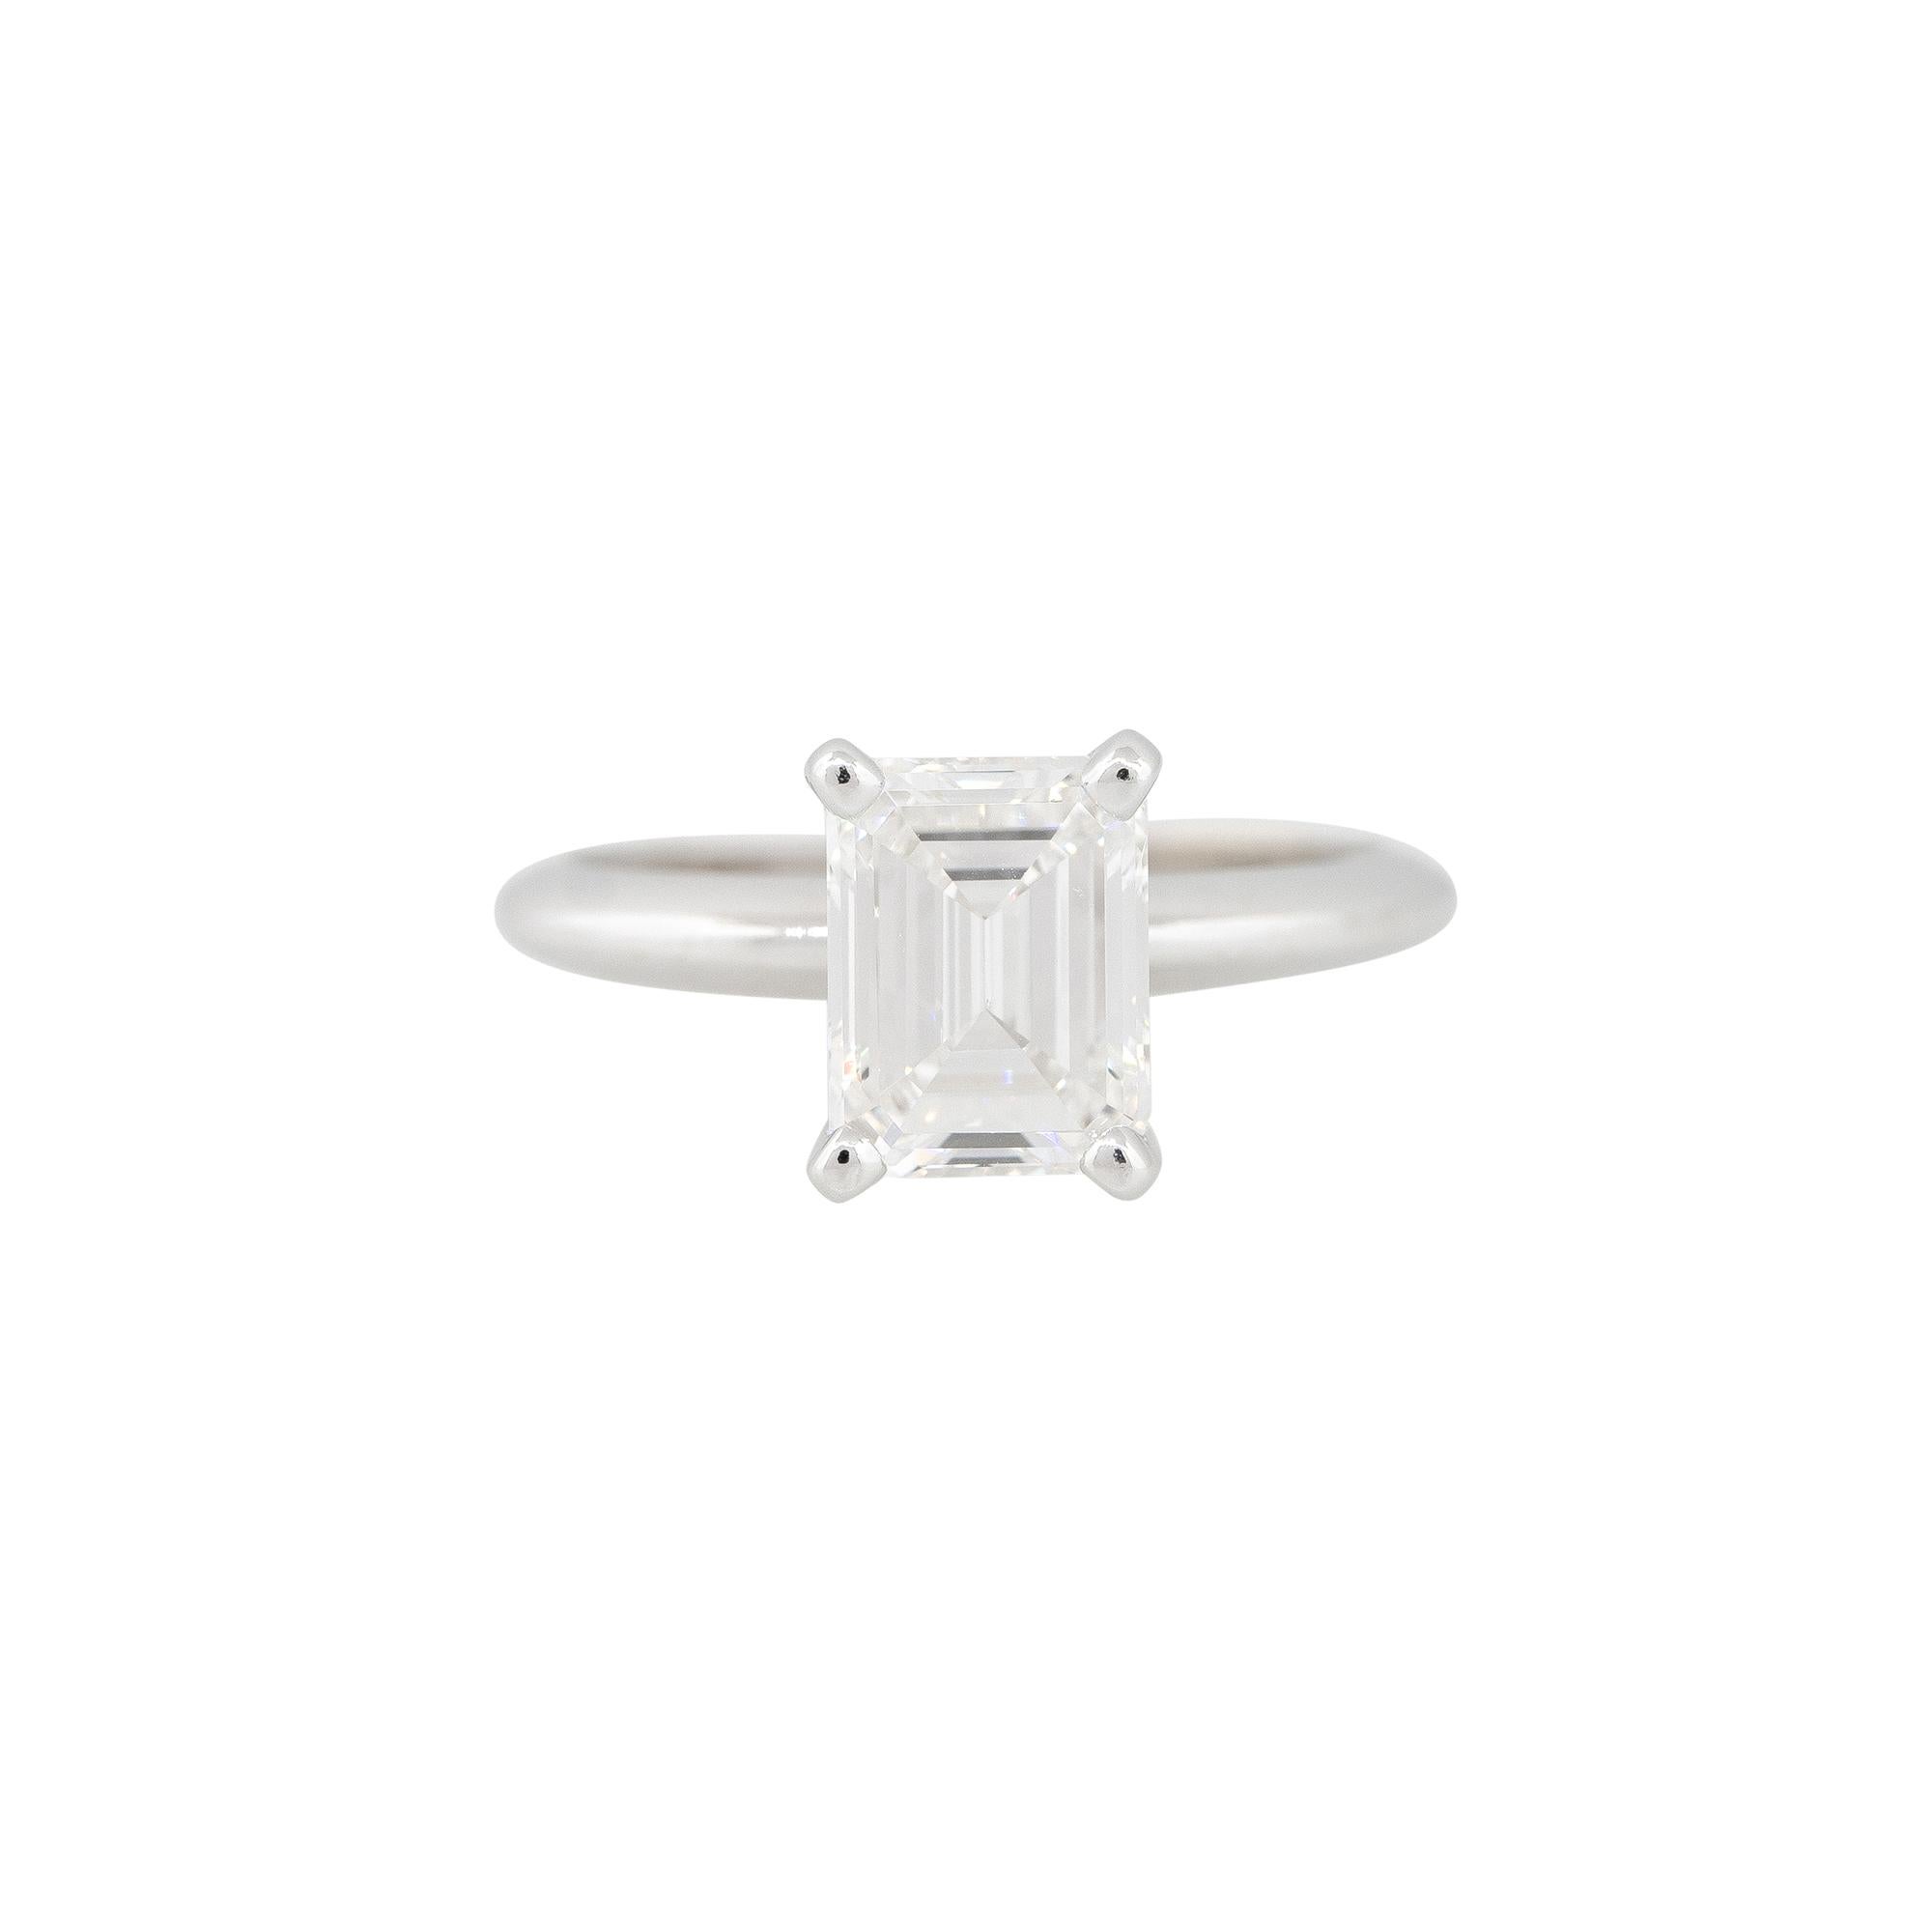 GIA Certified 18k White Gold 2.40ctw Emerald Cut Diamond Solitaire Engagement Ring
Style: Women's Diamond Engagement Ring
Material: 18k White Gold
Main Diamond Details: The main diamond is an Emerald Cut Diamond weighing 2.40 carats. The main stone